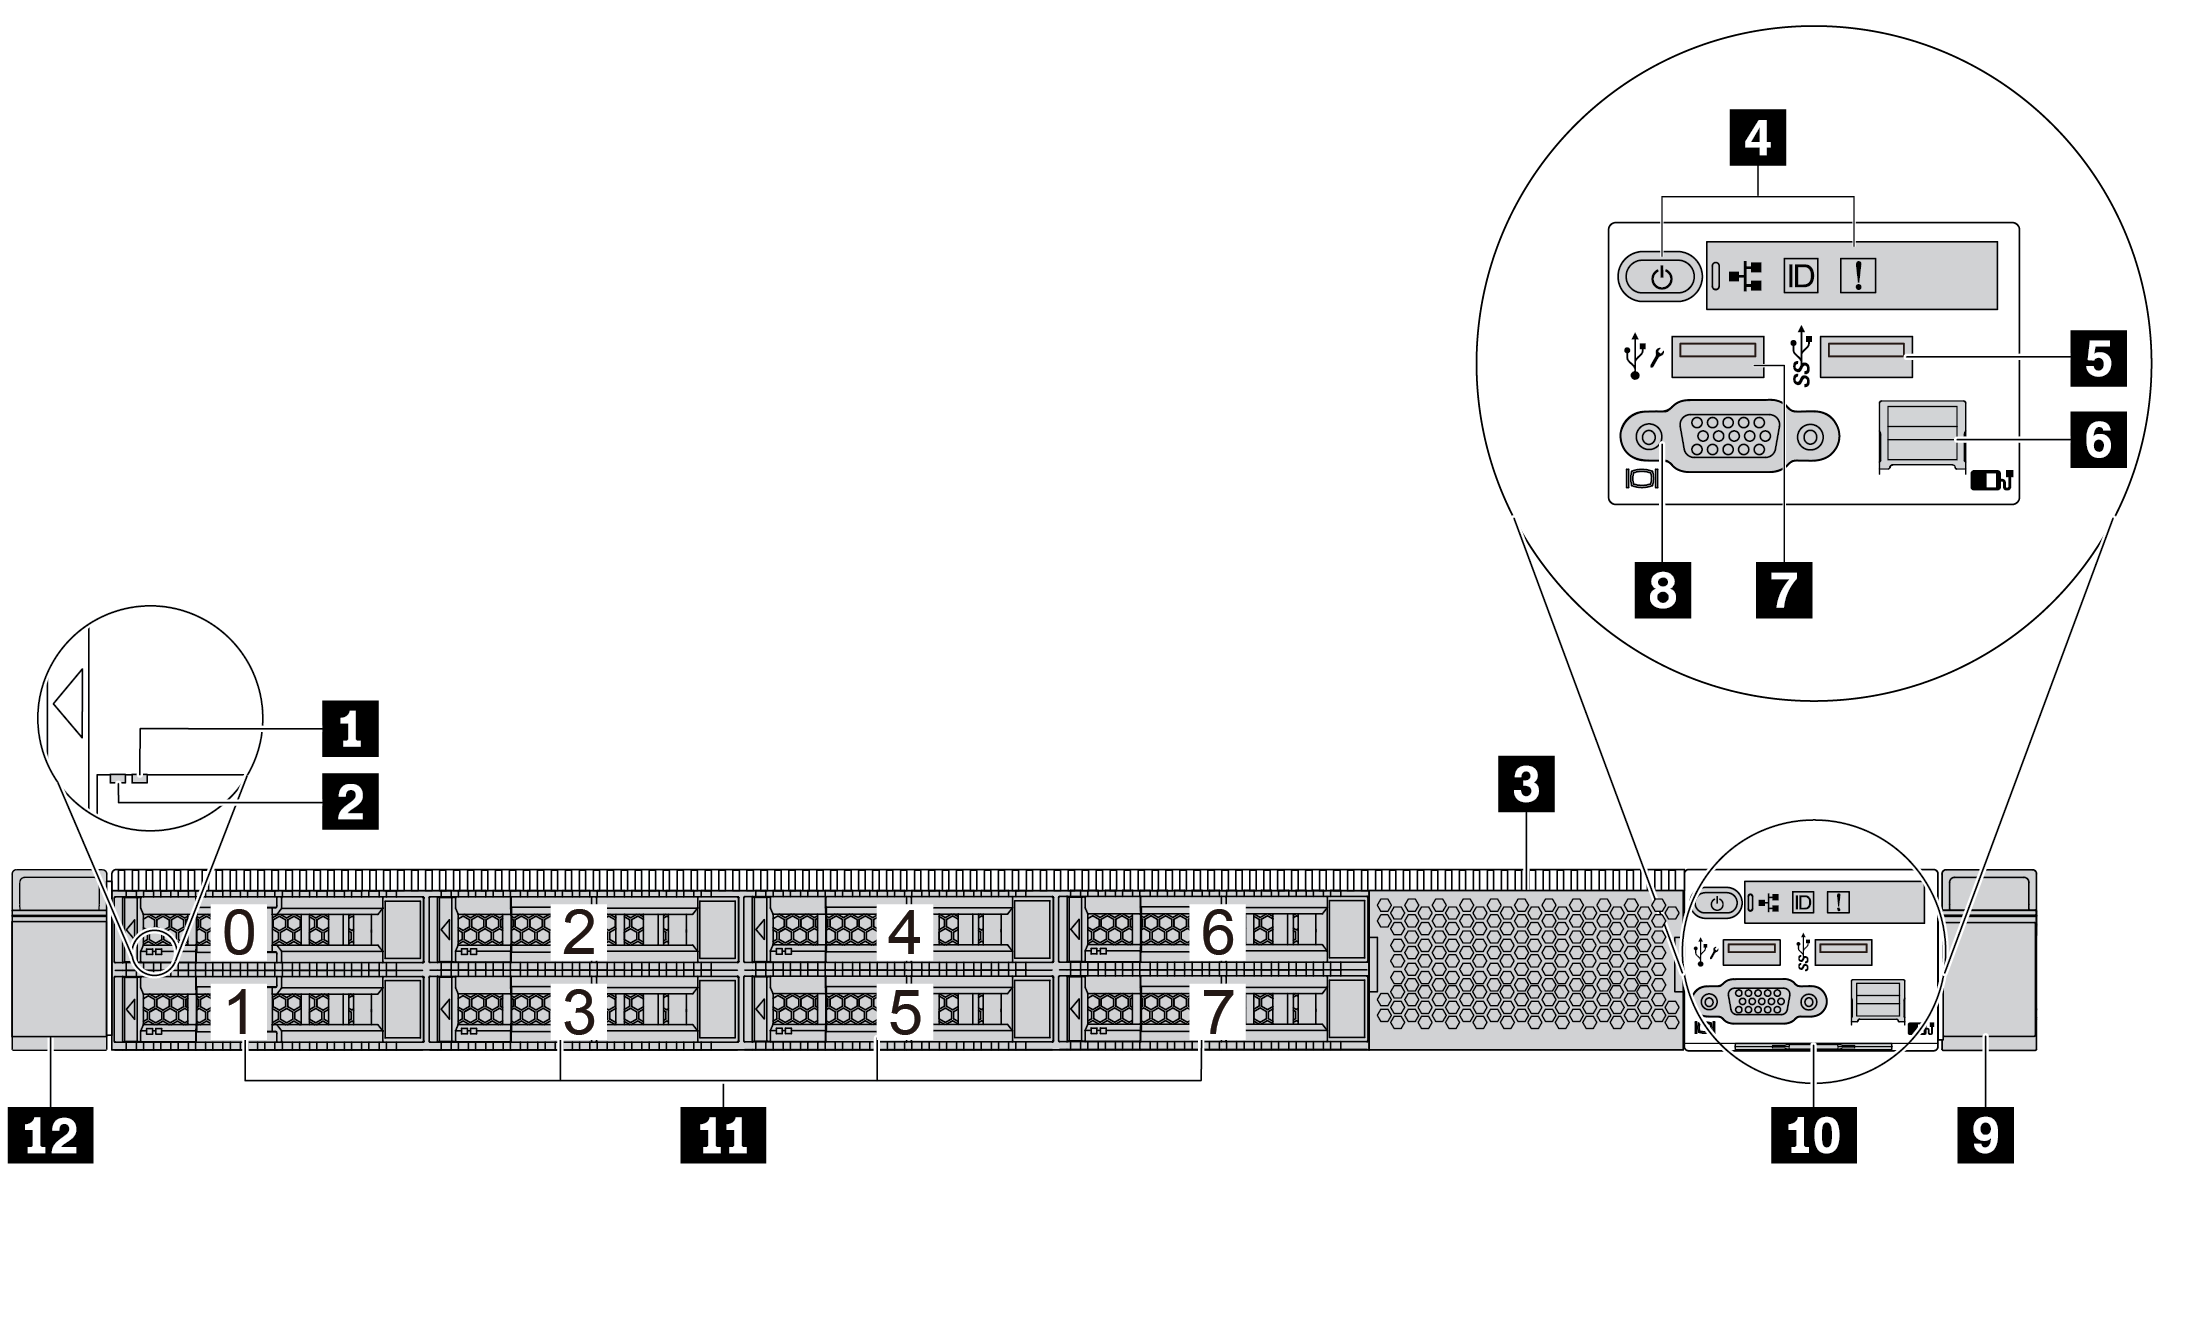 Front view of server model with eight 2.5-inch drive bays